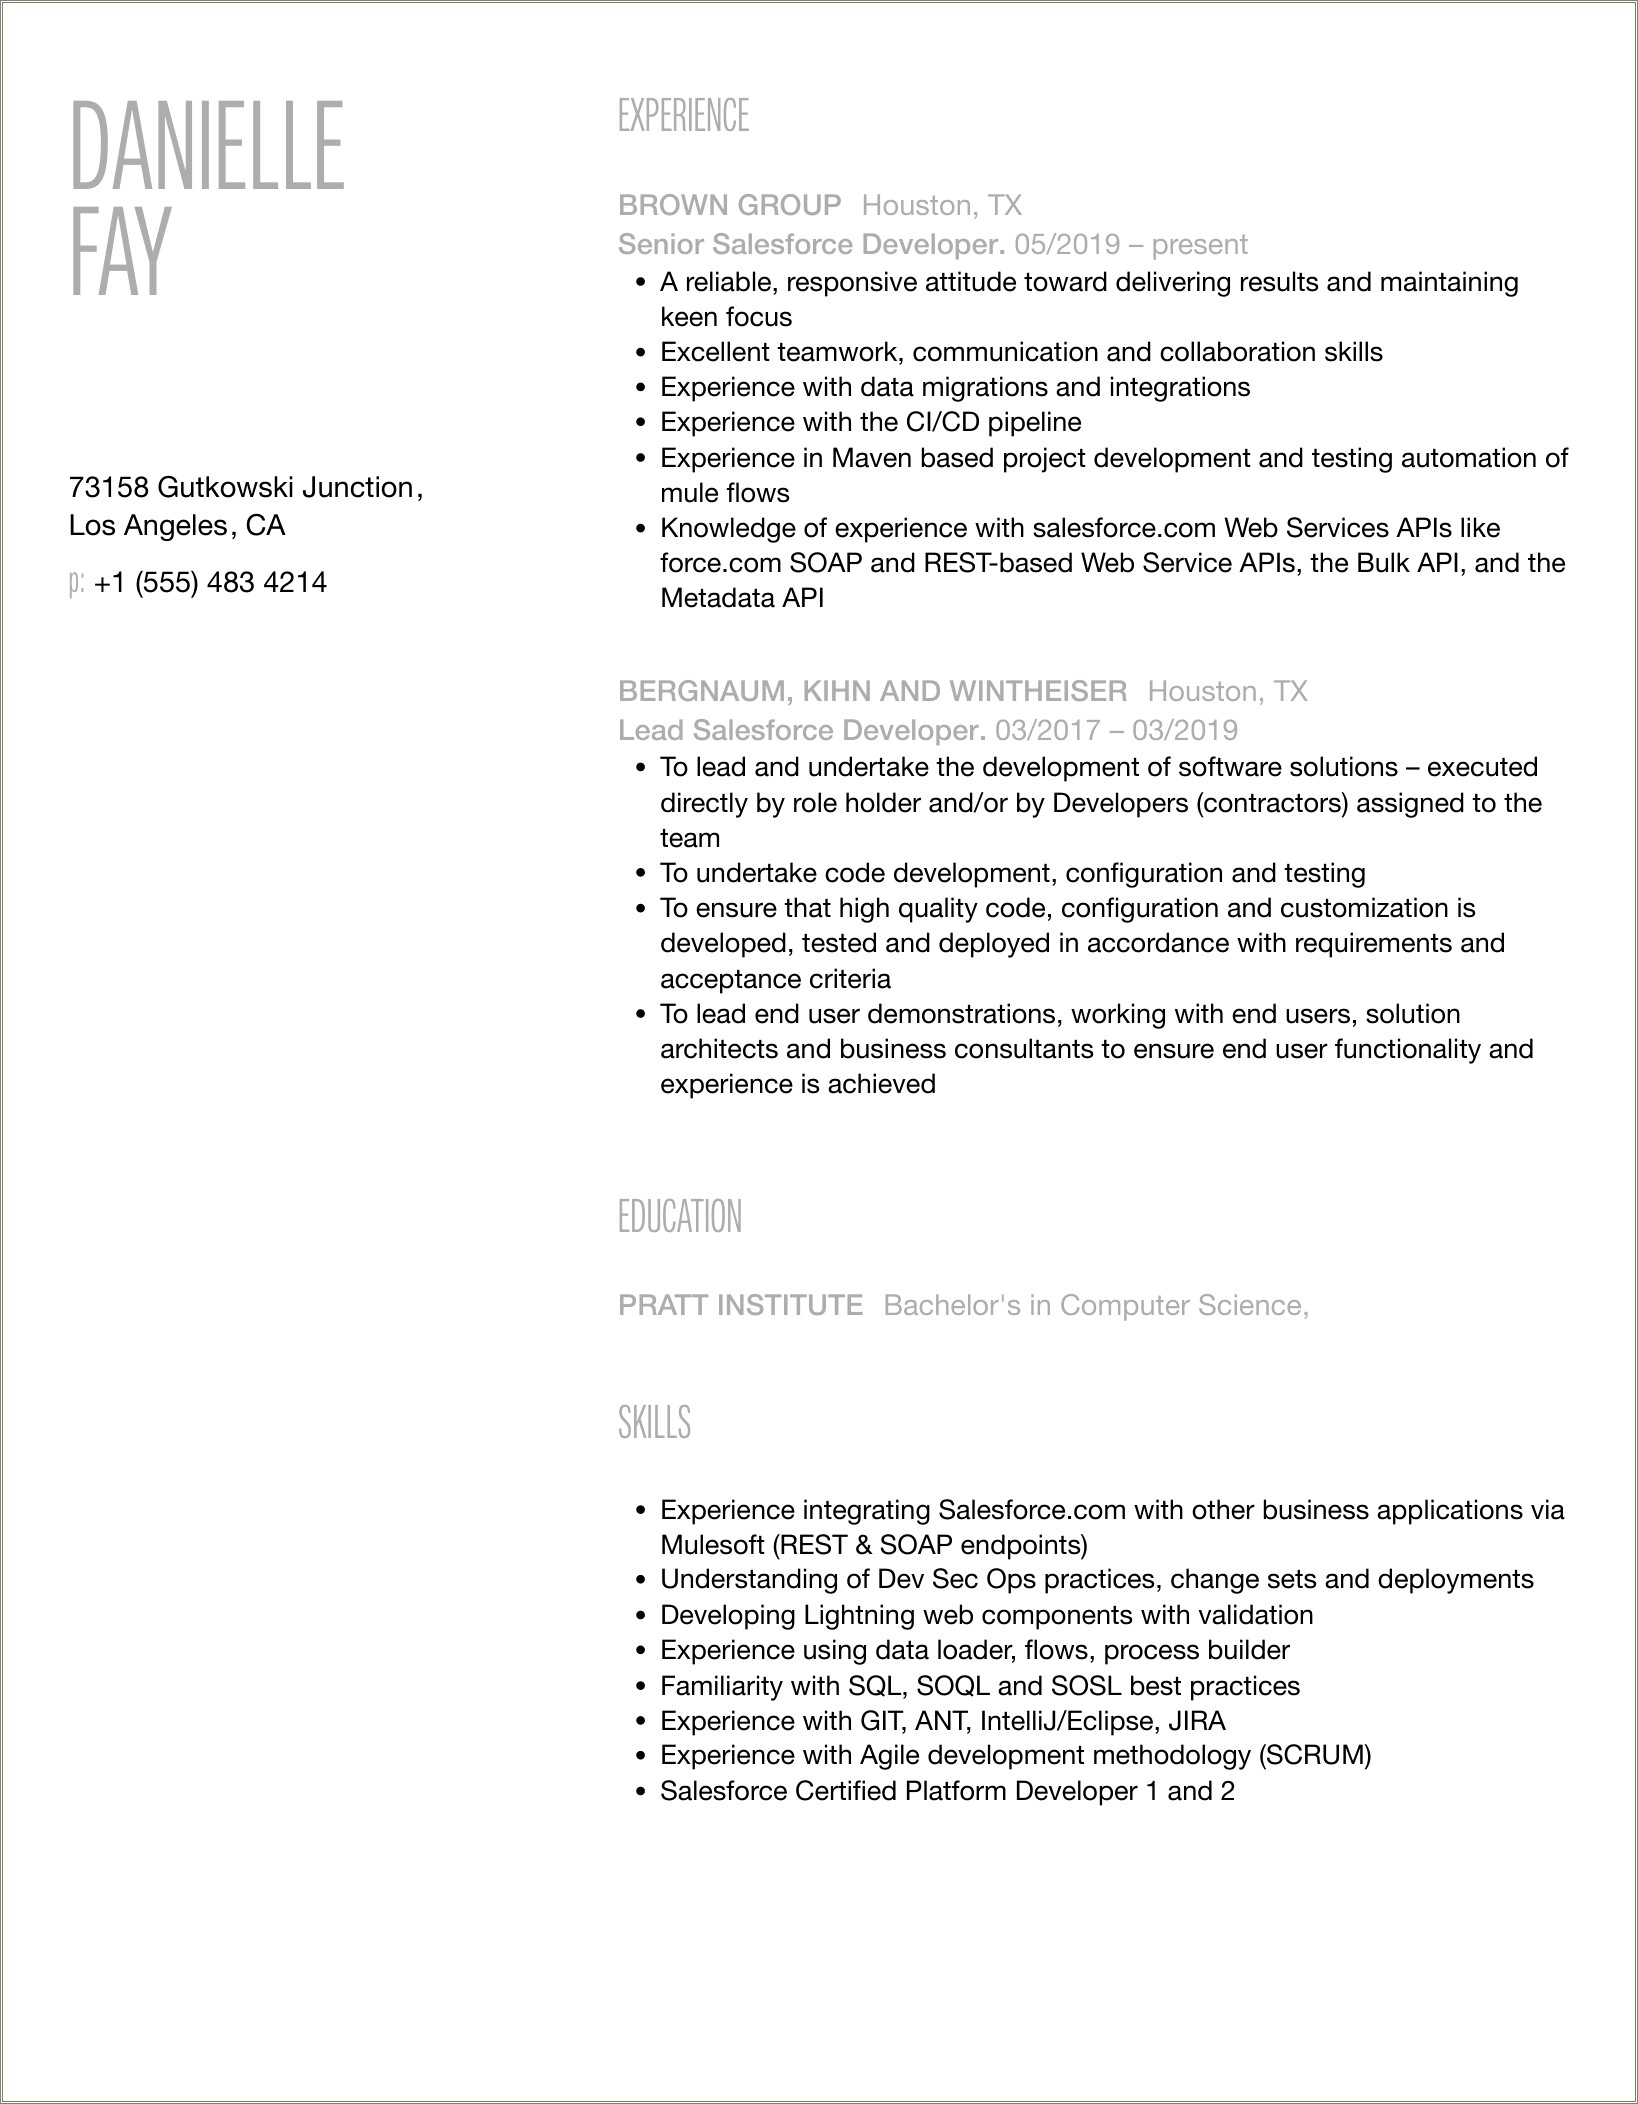 Informatica Resume For 7 Years Experience Dice Hireitpeople